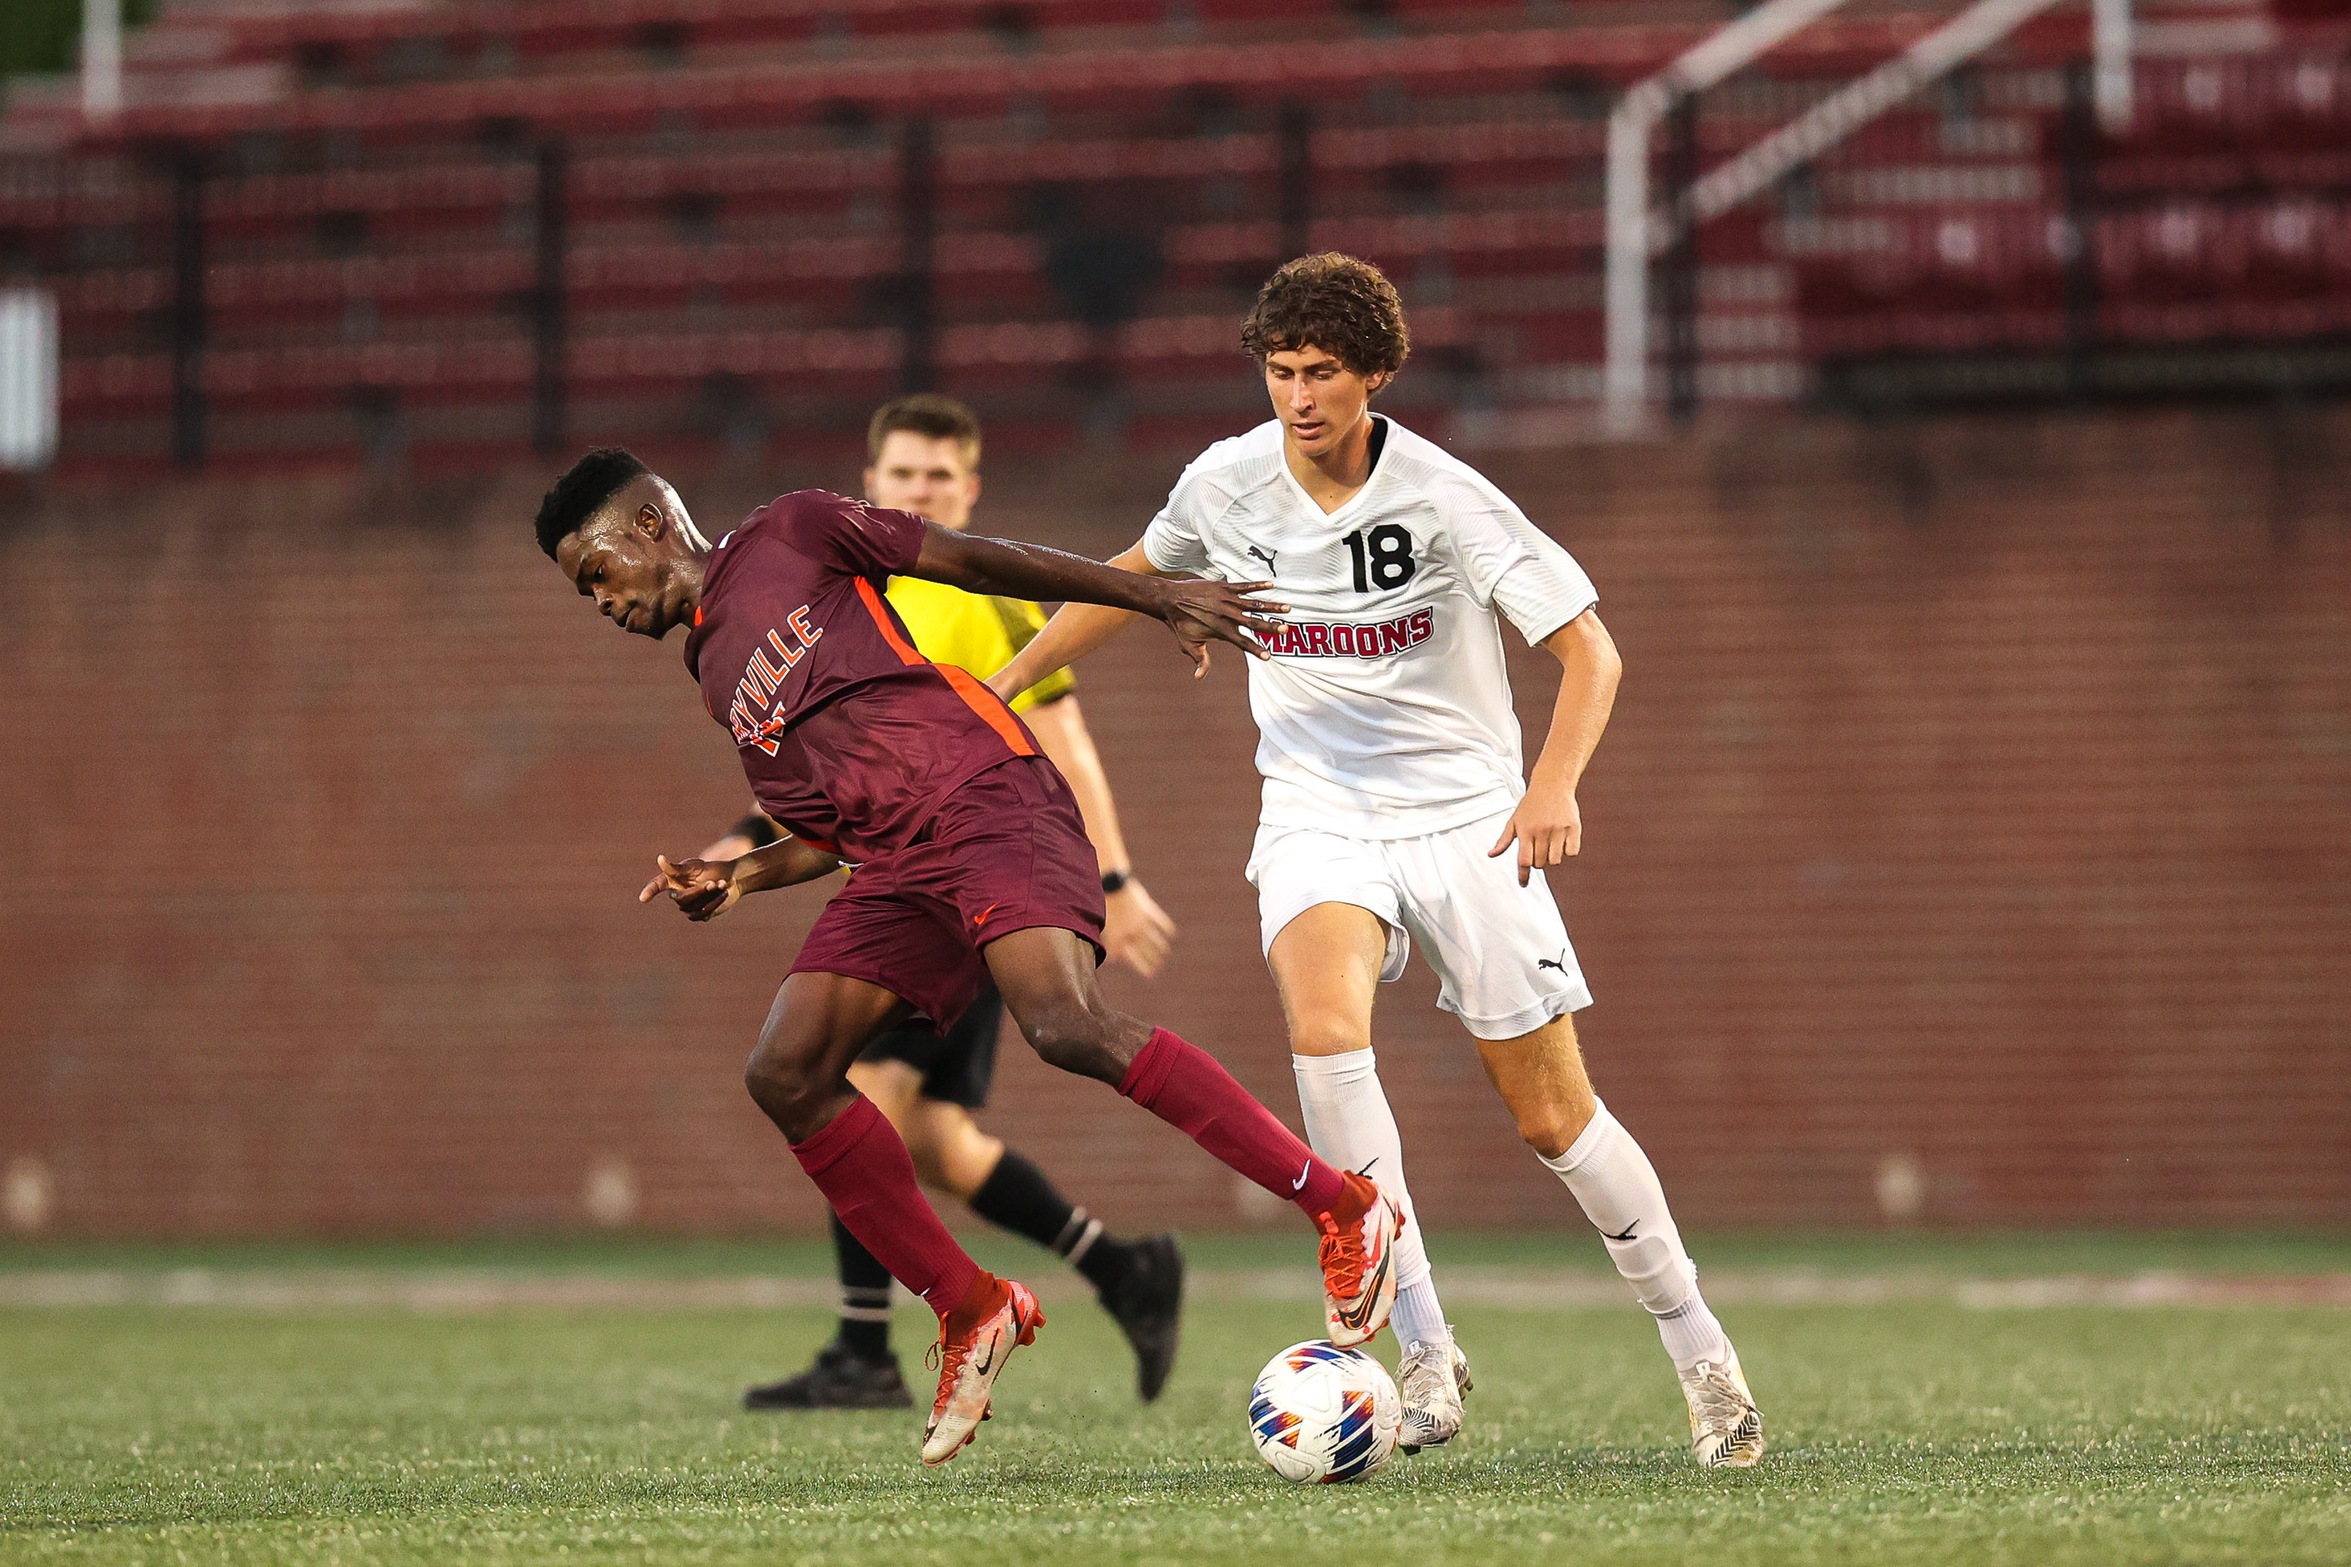 Kraus' Hat Trick Leads Maroons to 5-1 Win Over Averett